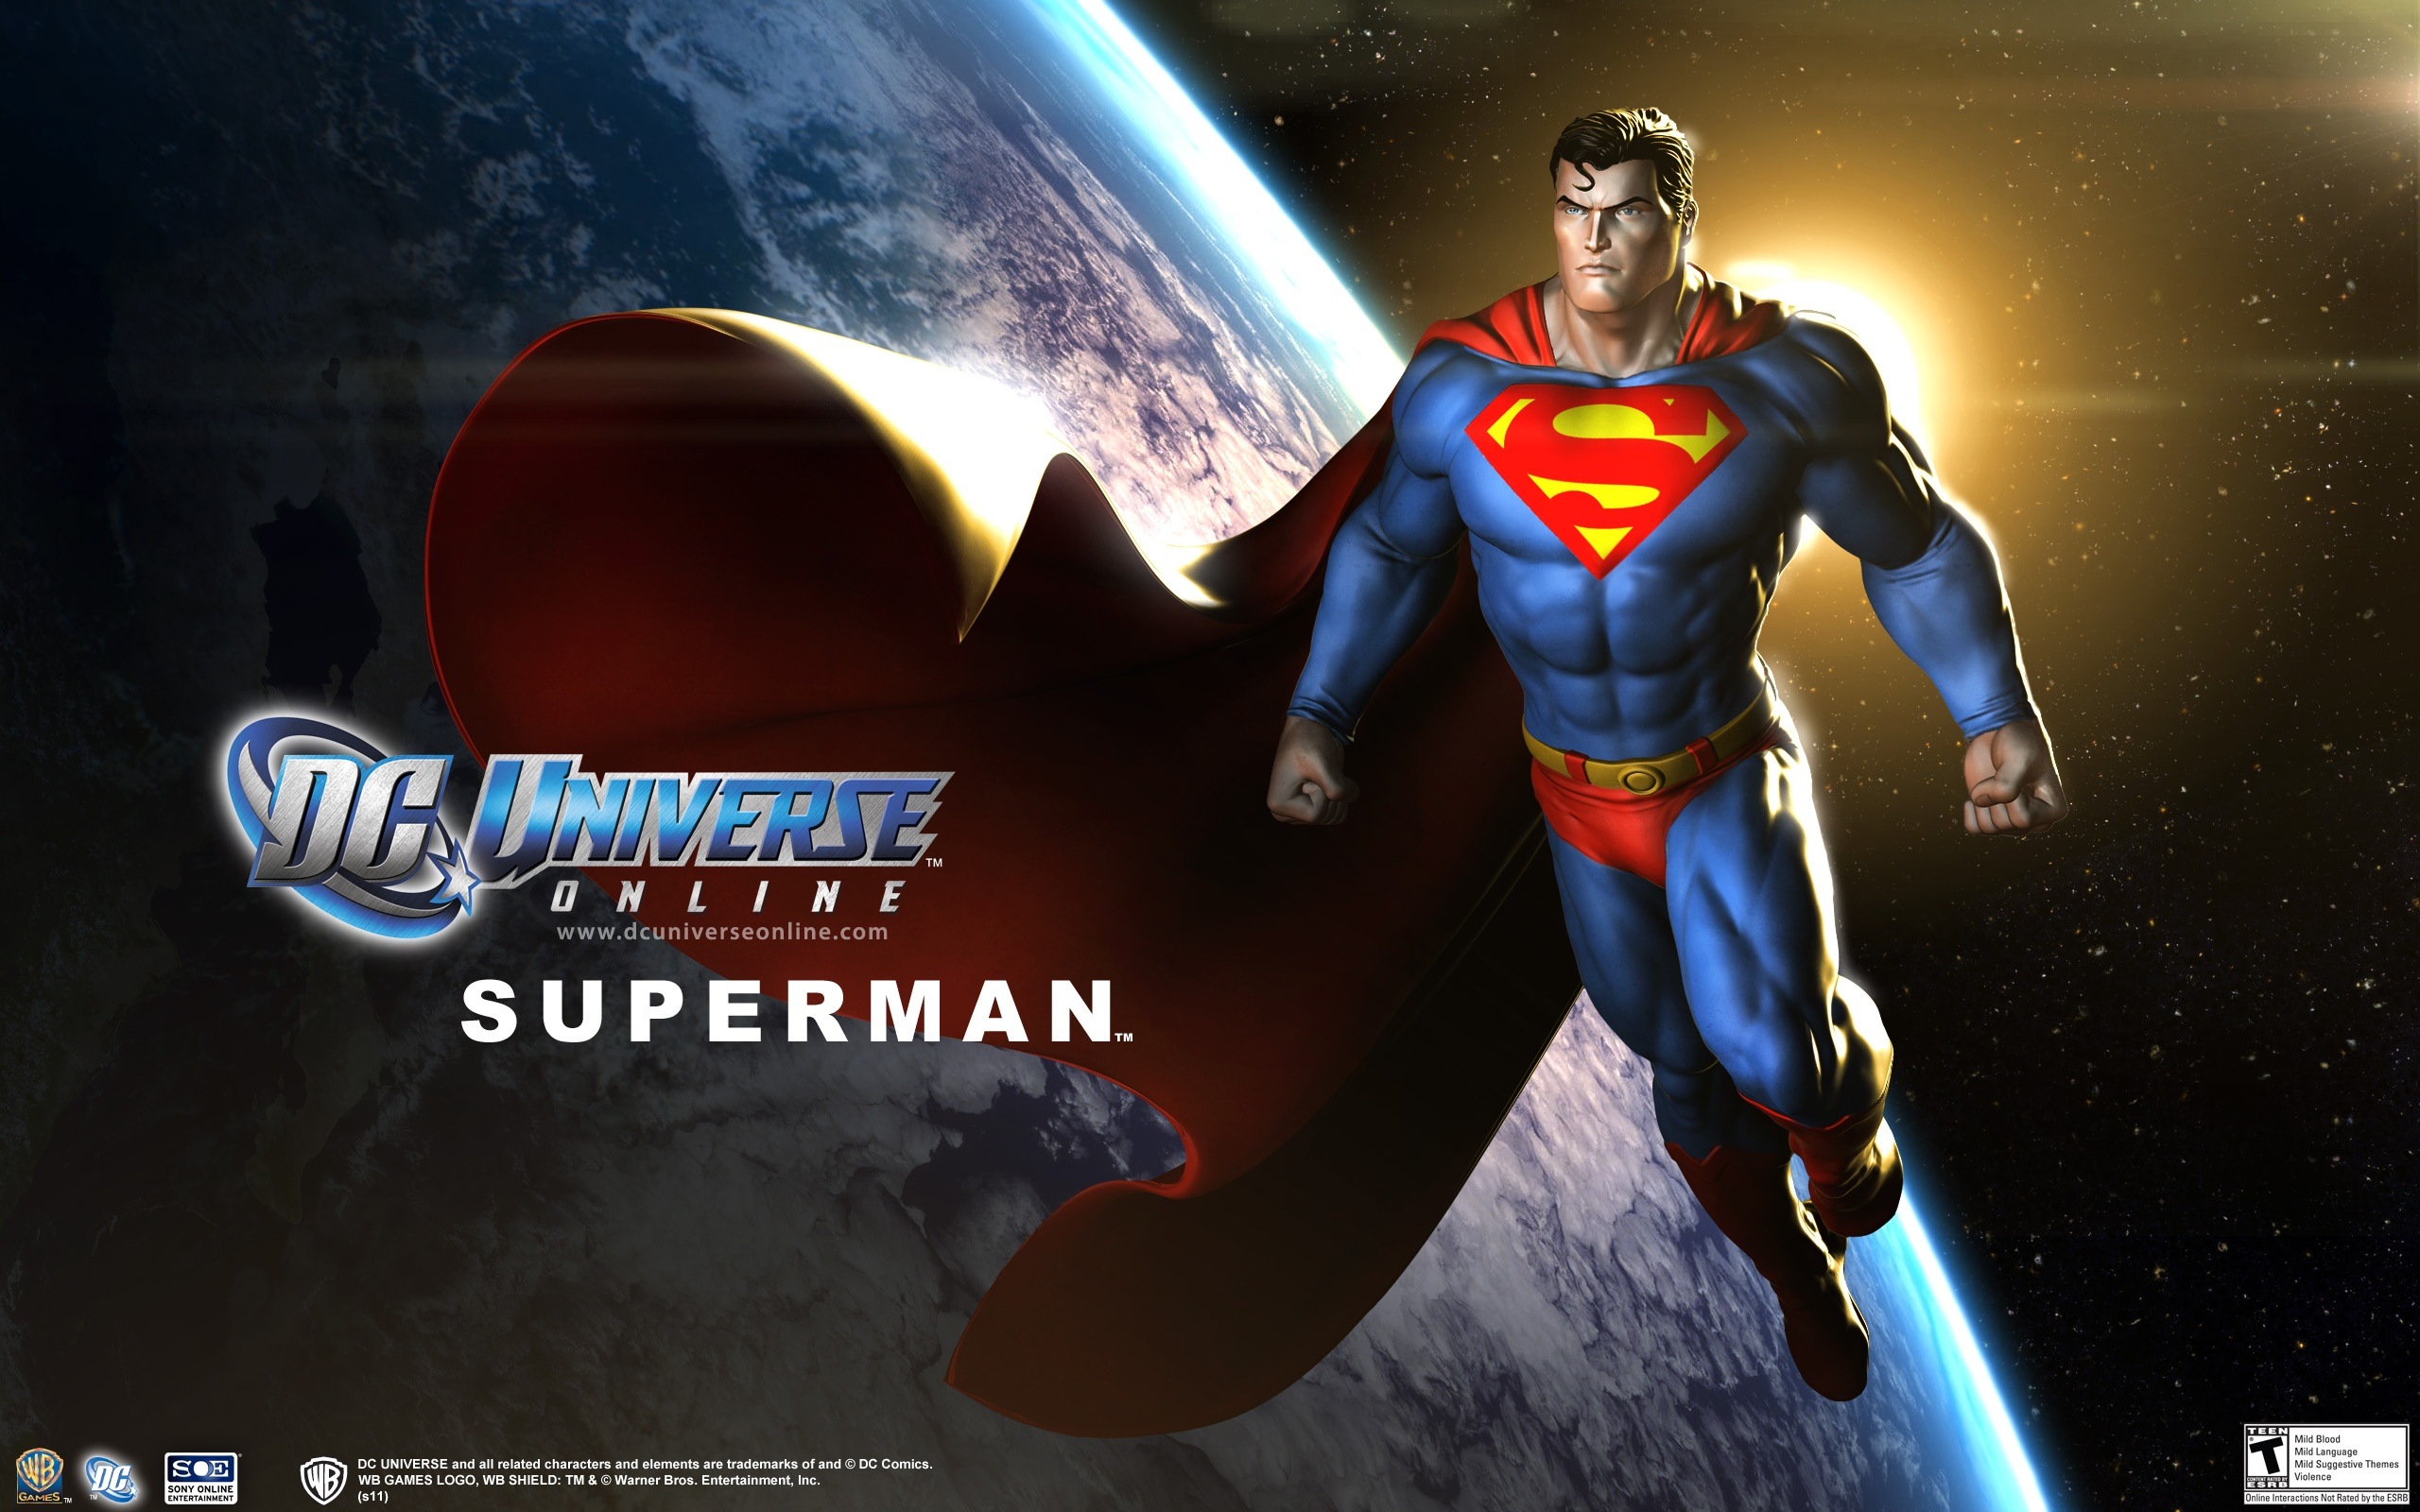 DC Universe Online HD game wallpapers #9 - 2560x1600